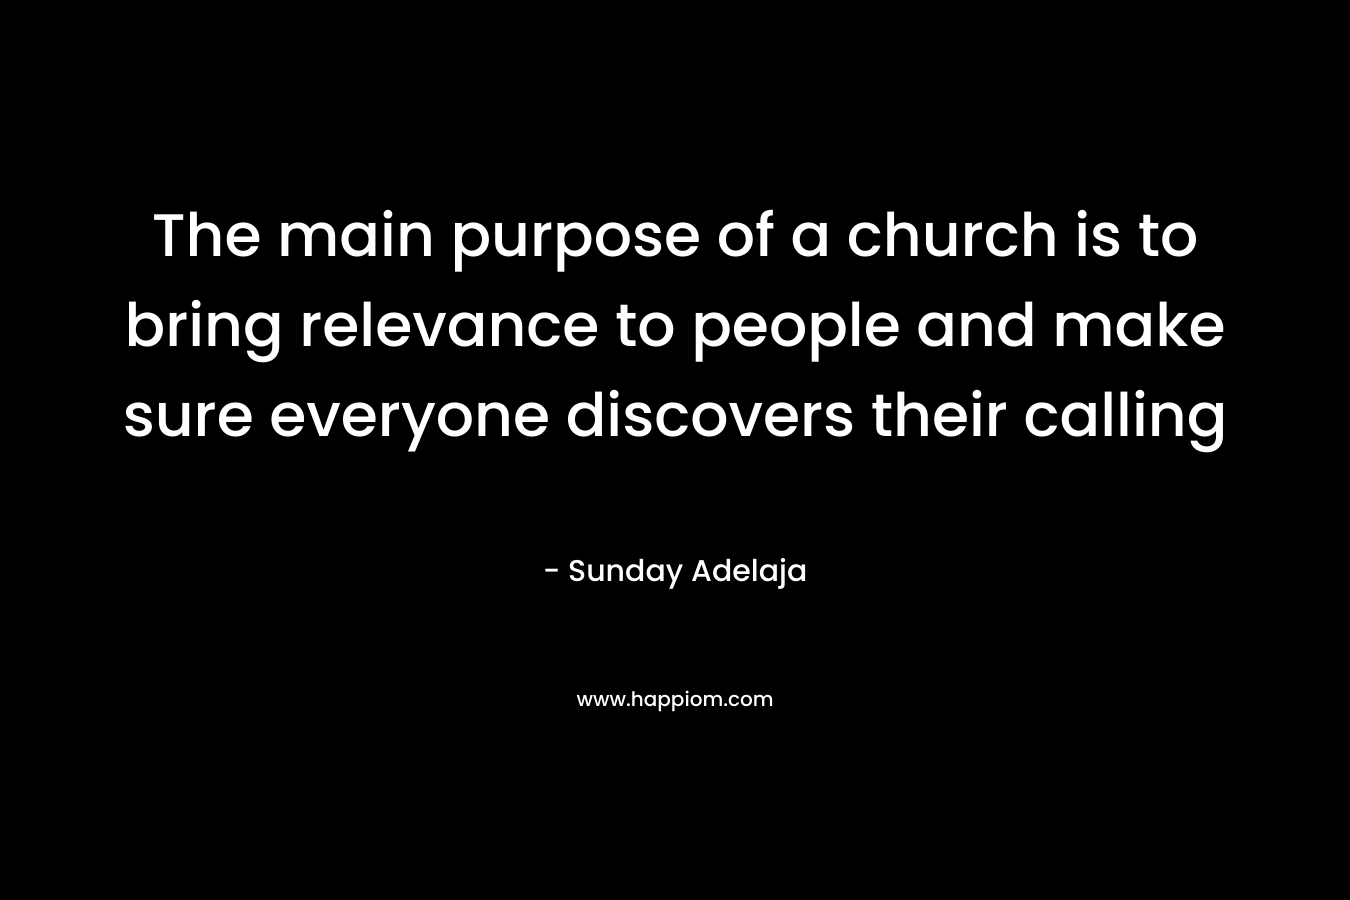 The main purpose of a church is to bring relevance to people and make sure everyone discovers their calling